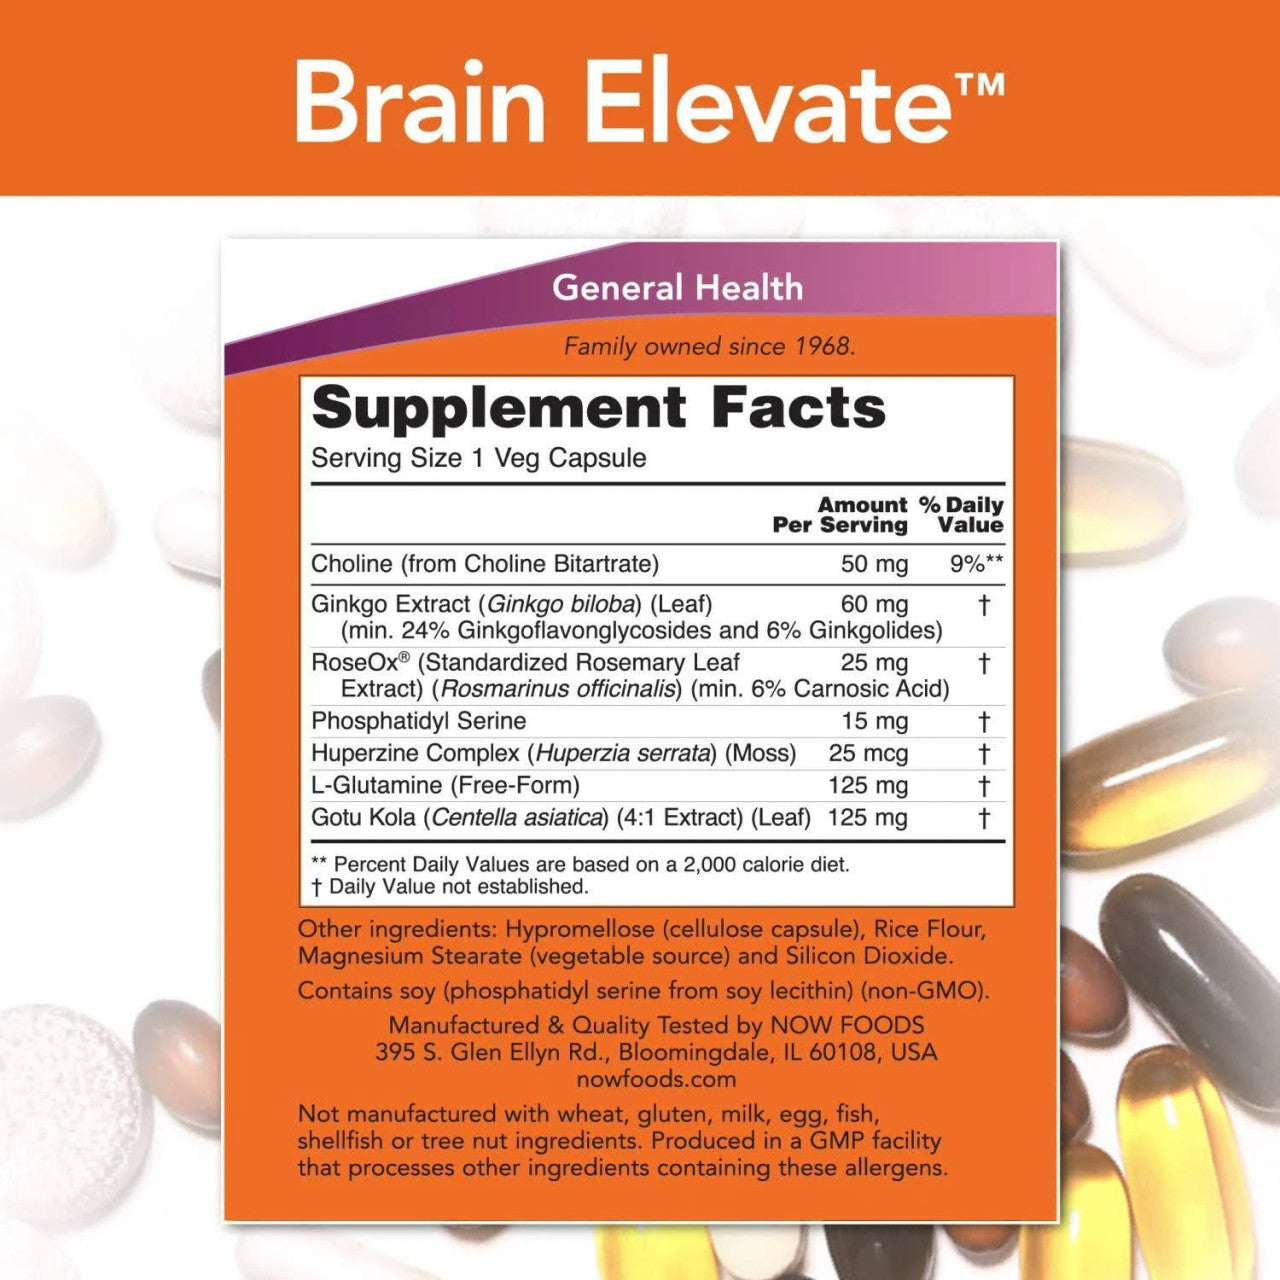 Now Brain Elevate supplement facts